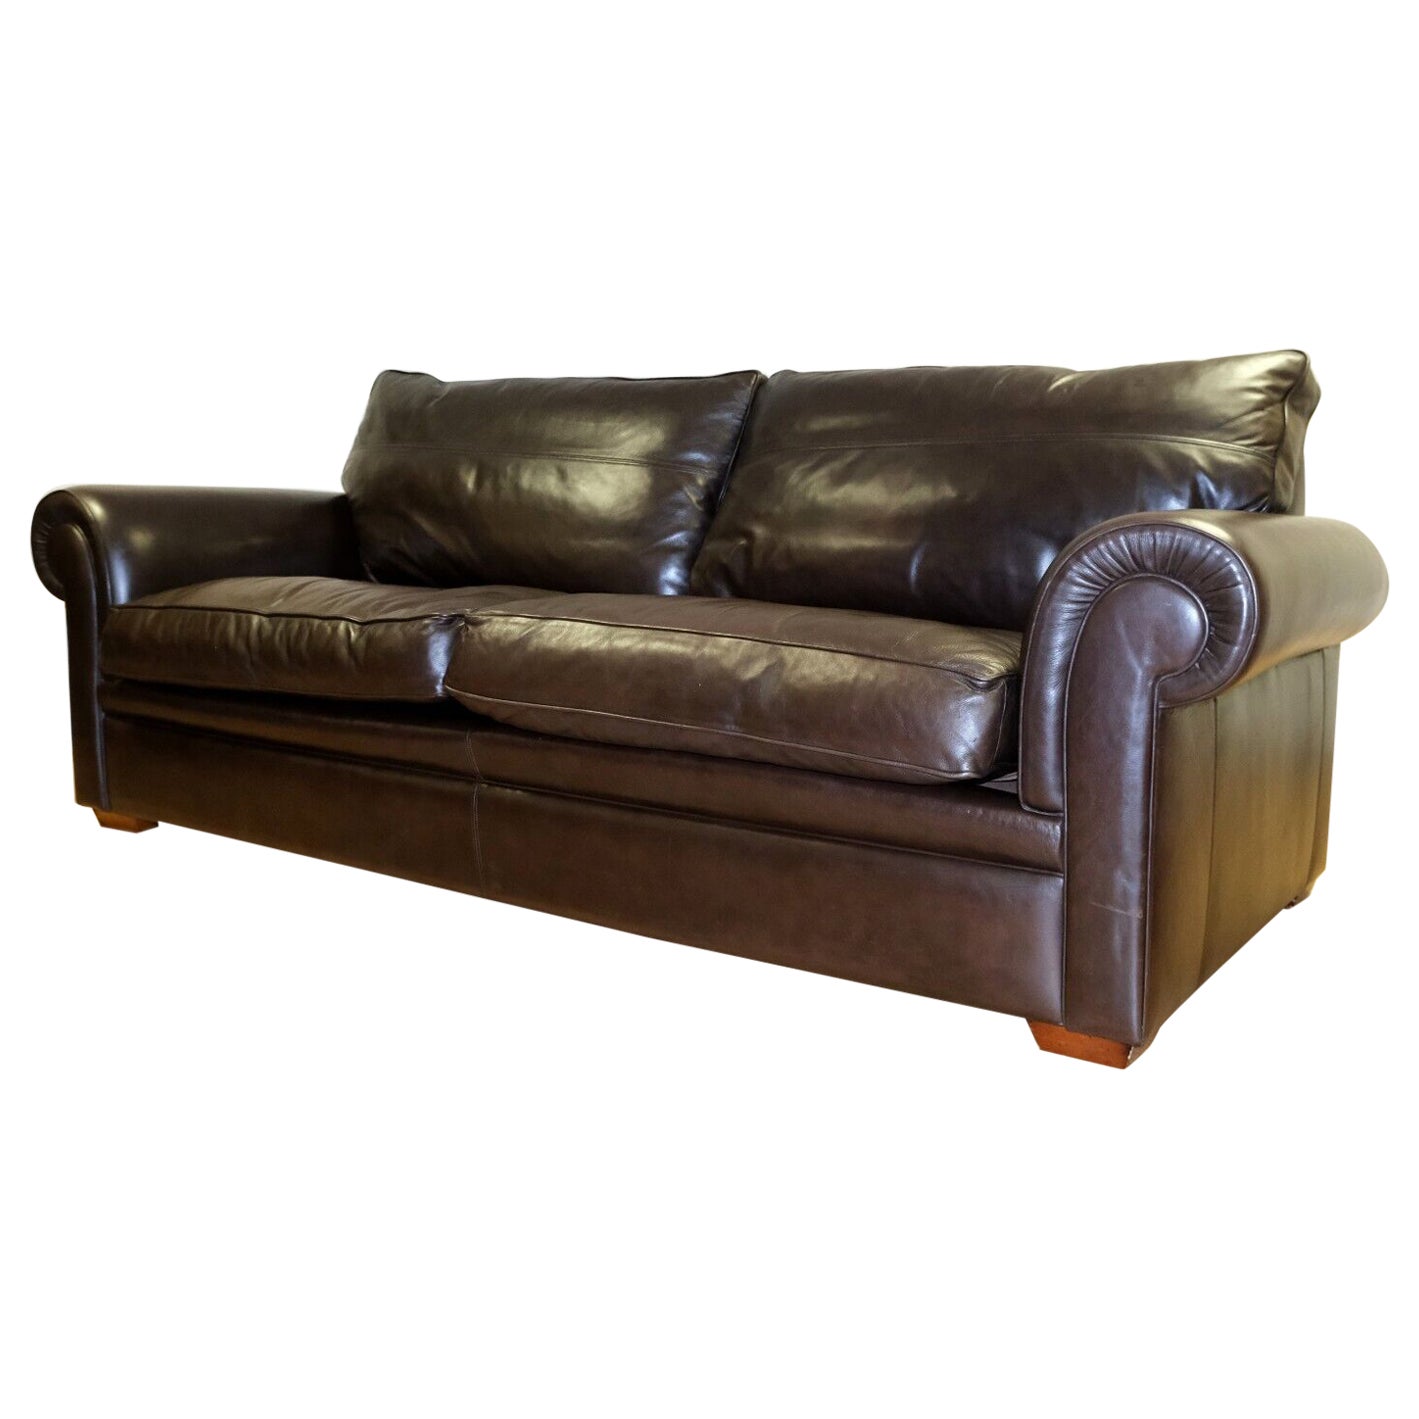 STUNNiNG DURESTA GARRICK THREE SEATER BROWN LEATHER SOFA ON CLASSIC SCROLL ARMS For Sale